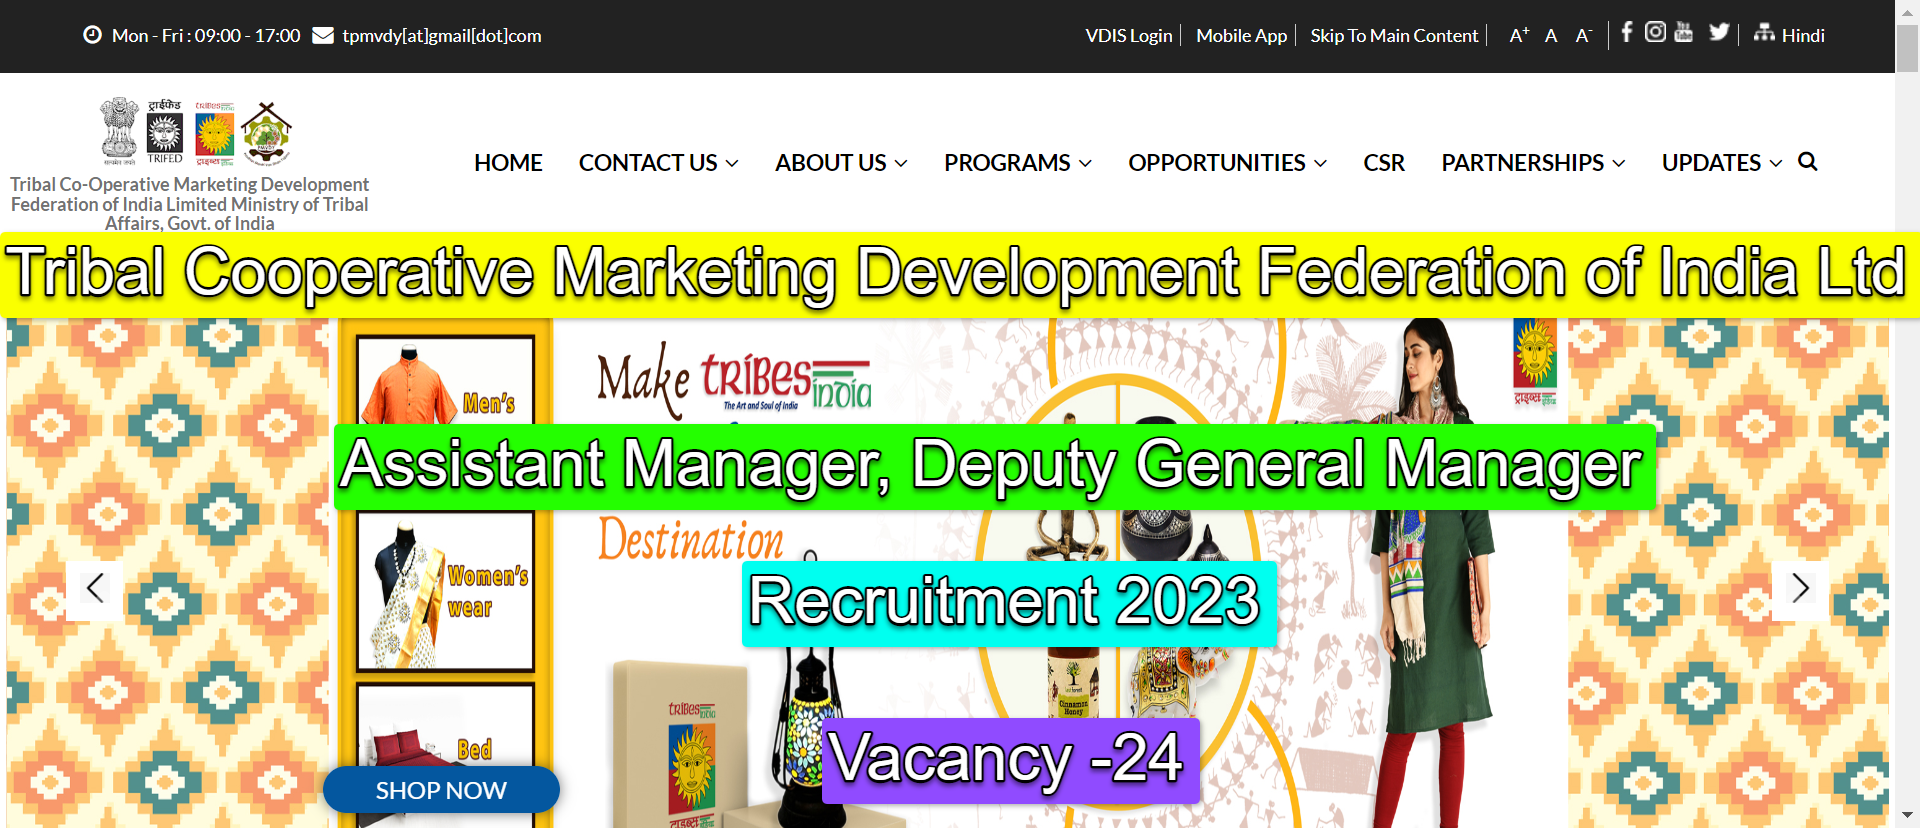 TRIFED Recruitment 2023- Assistant Manager, Deputy General Manager Posts